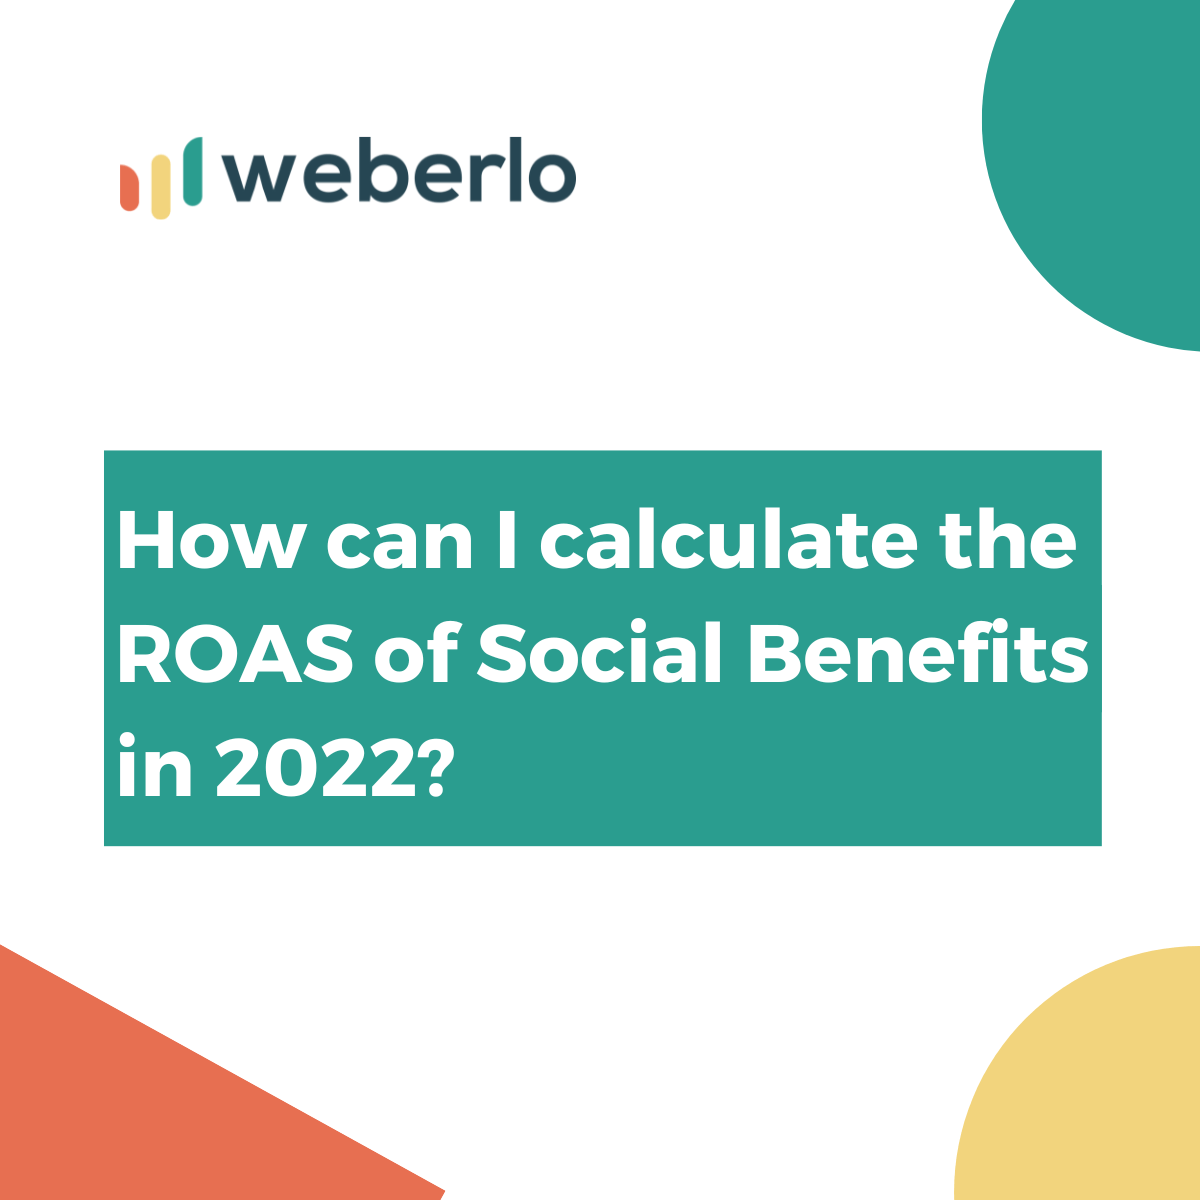 How can I calculate the ROAS of Social Benefits in 2022?